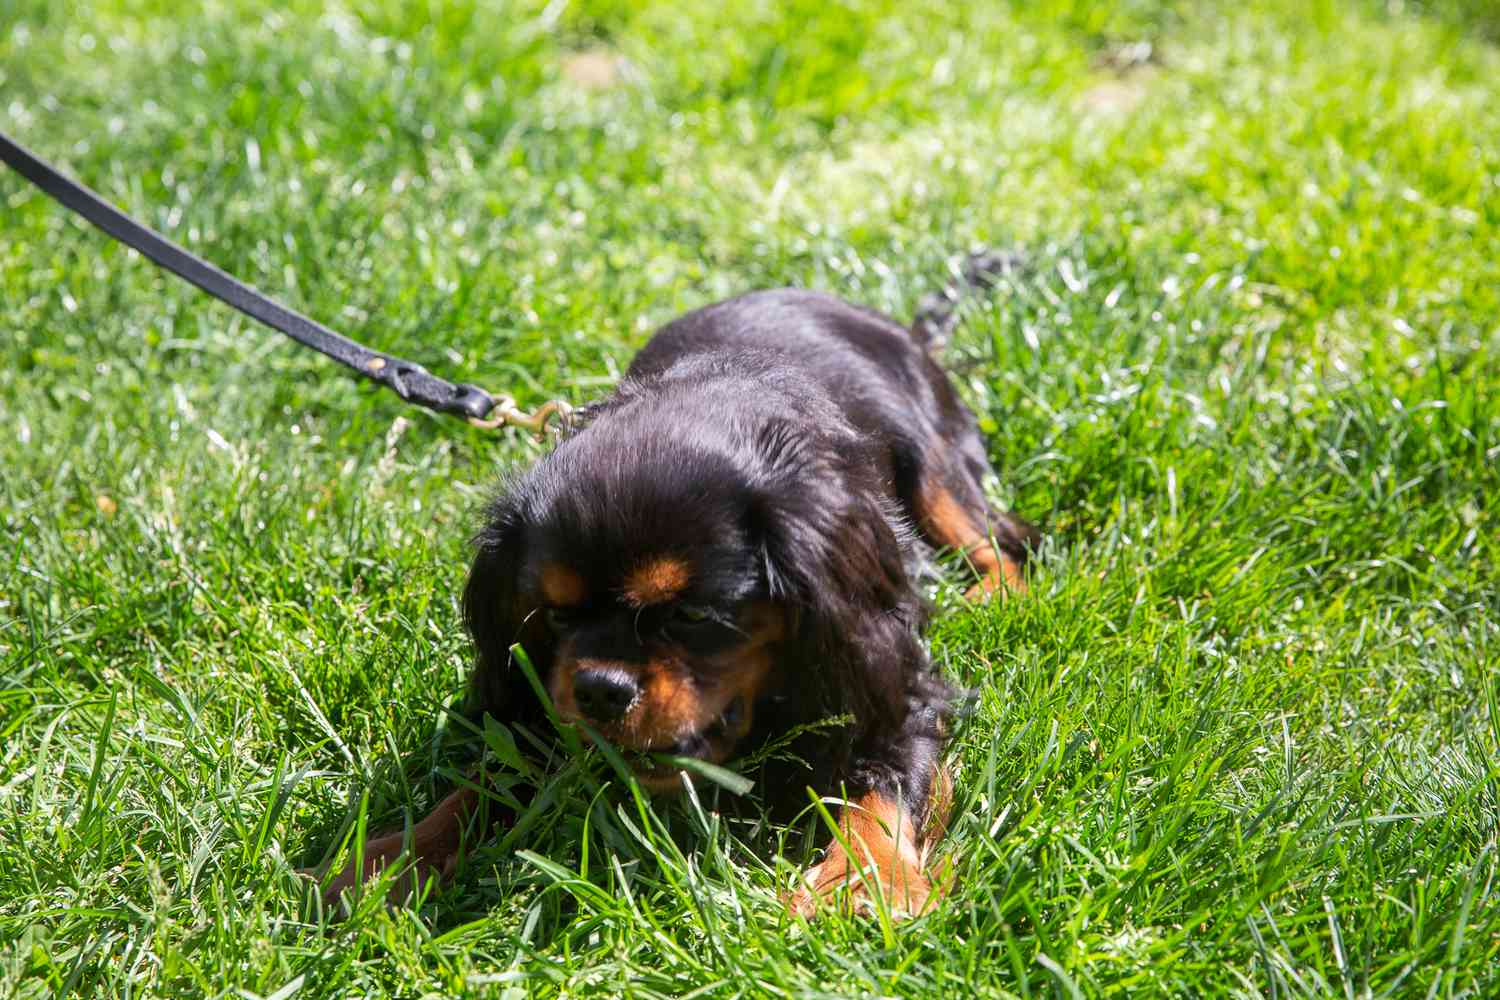 How To Stop My Puppy From Eating Grass